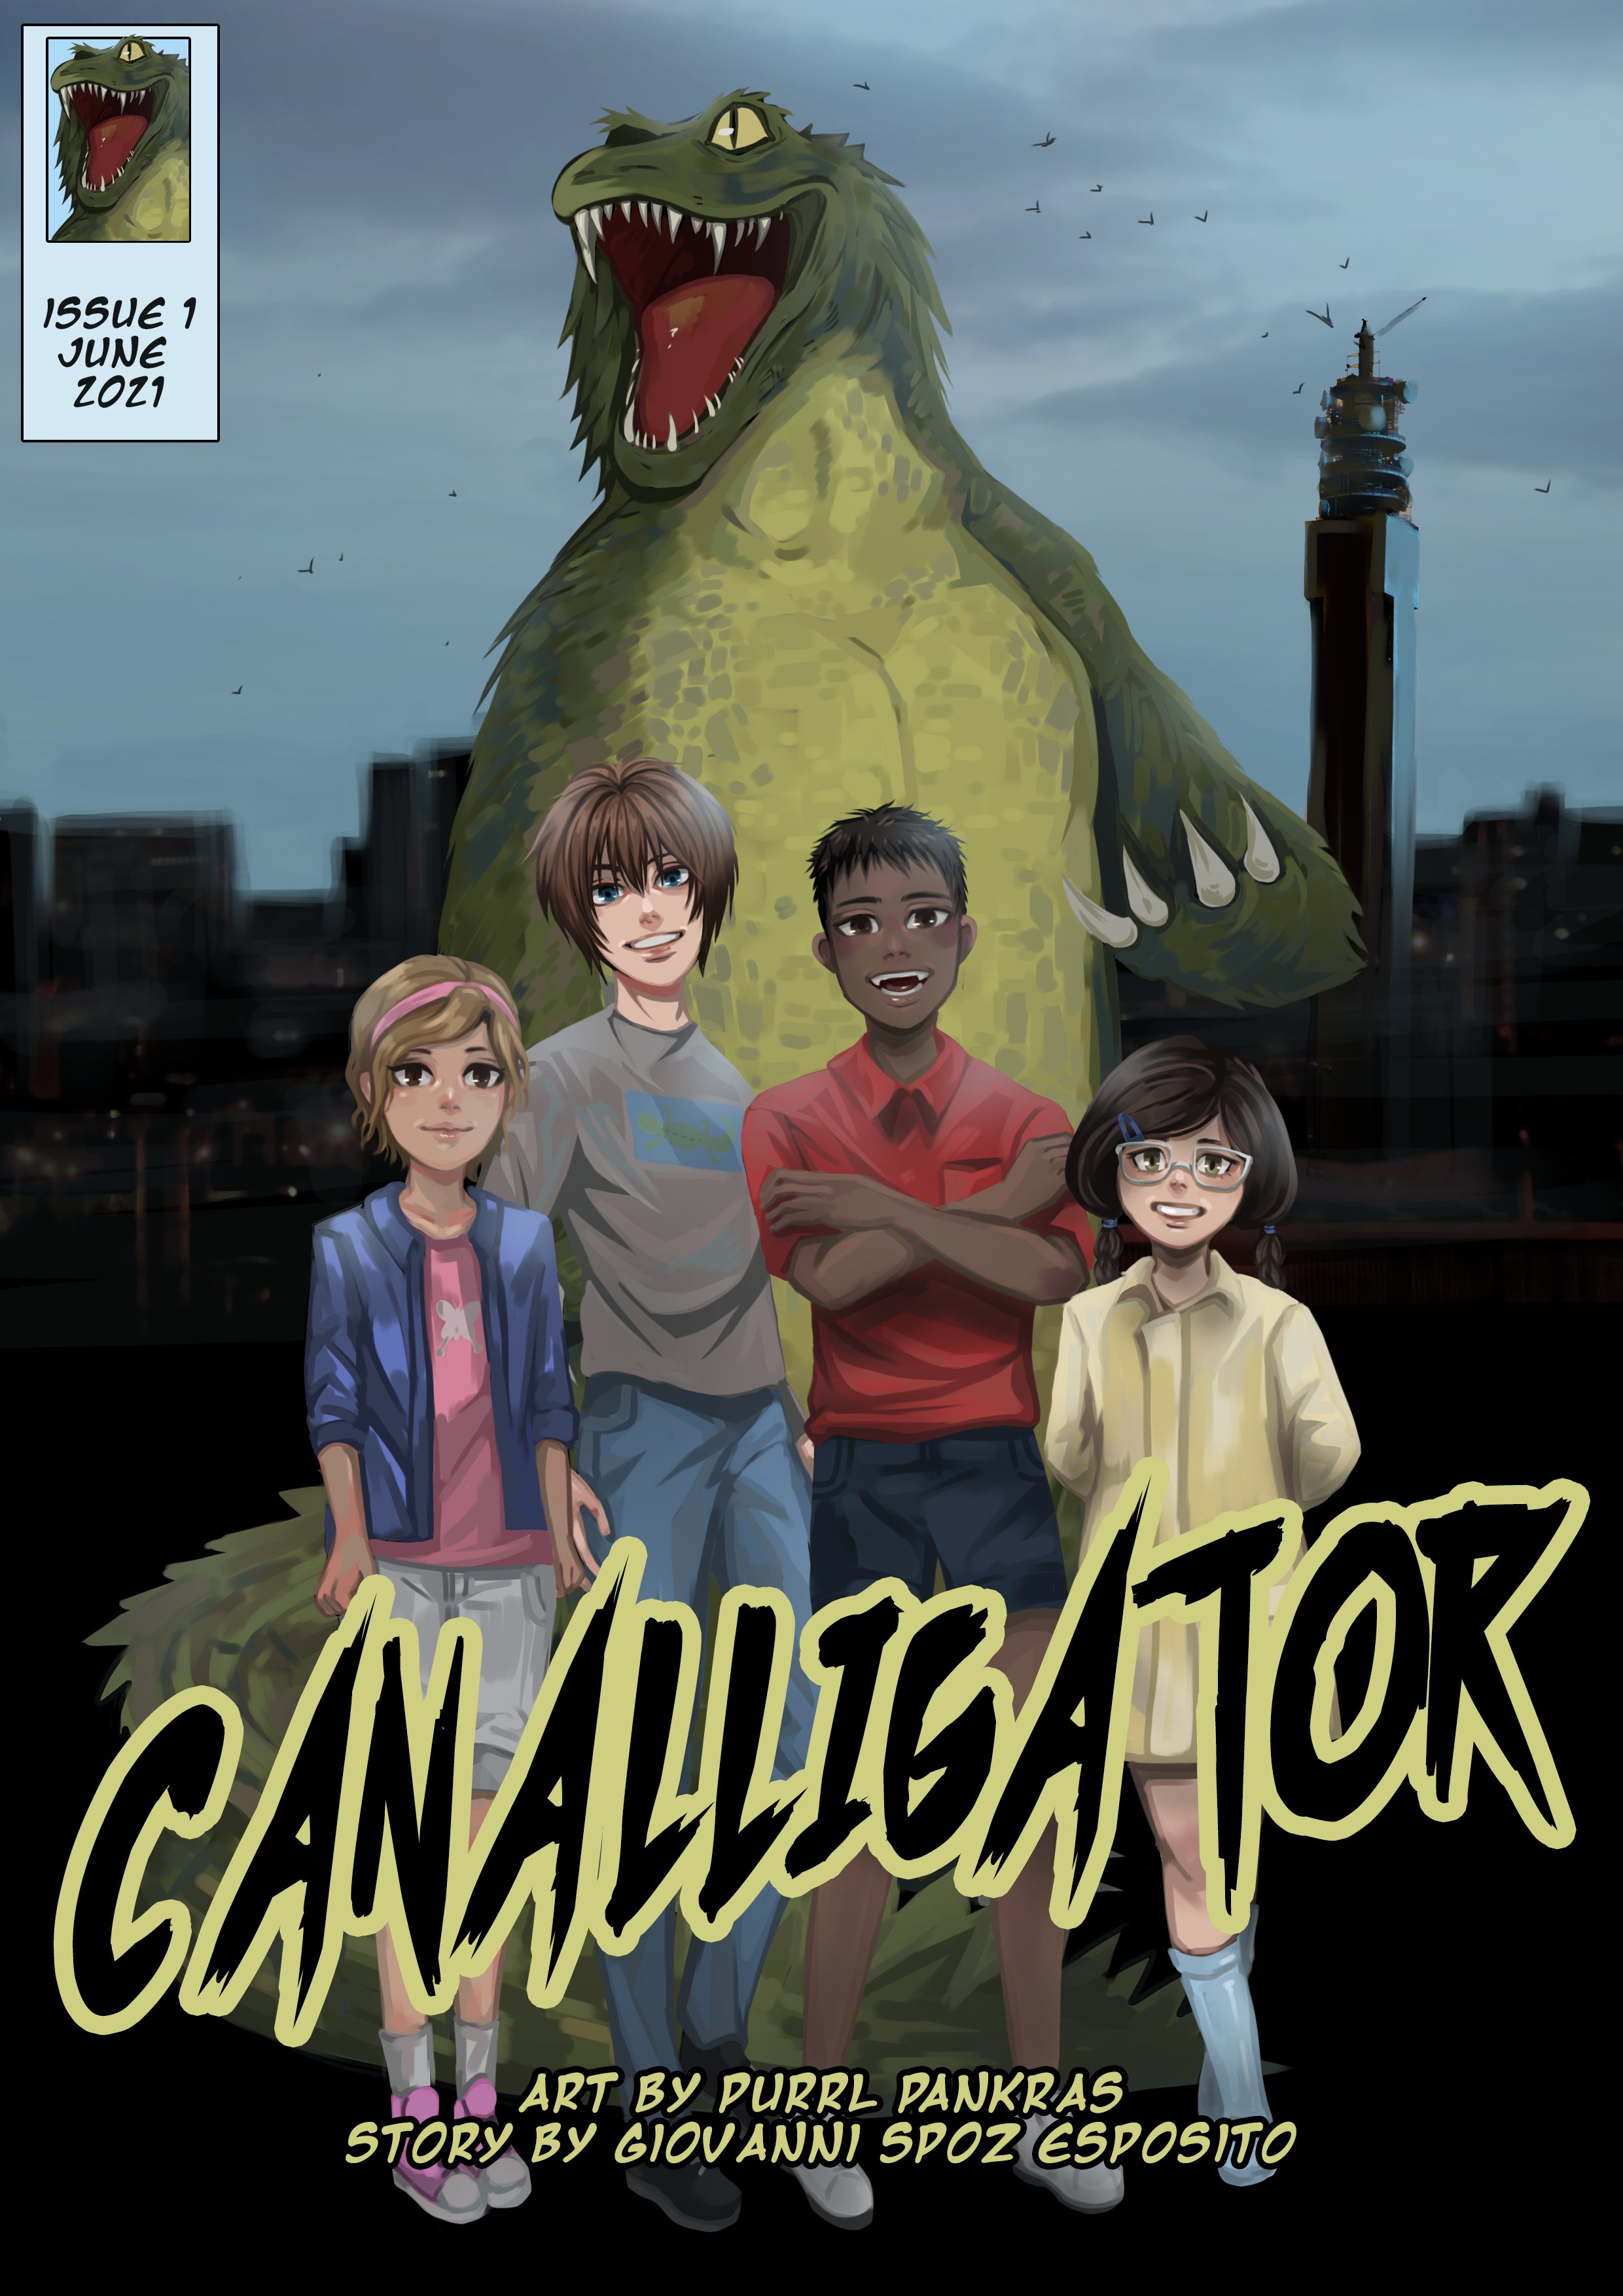 Giovanni Esposito on Twitter: &quot;&#39;Canalligator&#39; is coming. Landing late June.  I&#39;m a bit excited. A poetic graphic novel (with some cheeky little YouTube  films, narrated by me, with music by the amazing